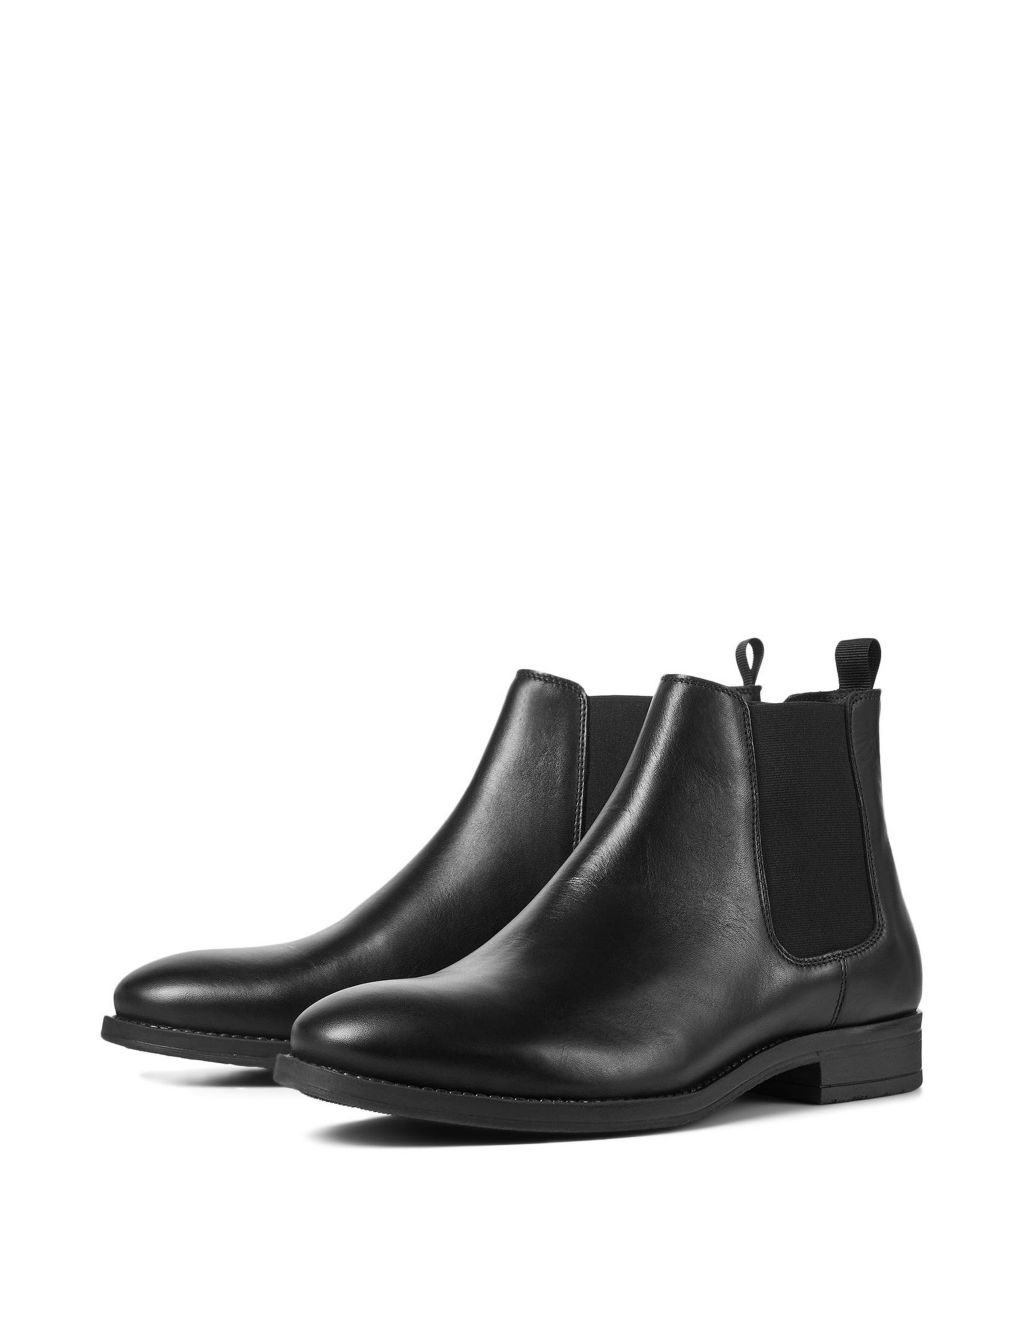 Leather Chelsea Boots image 2